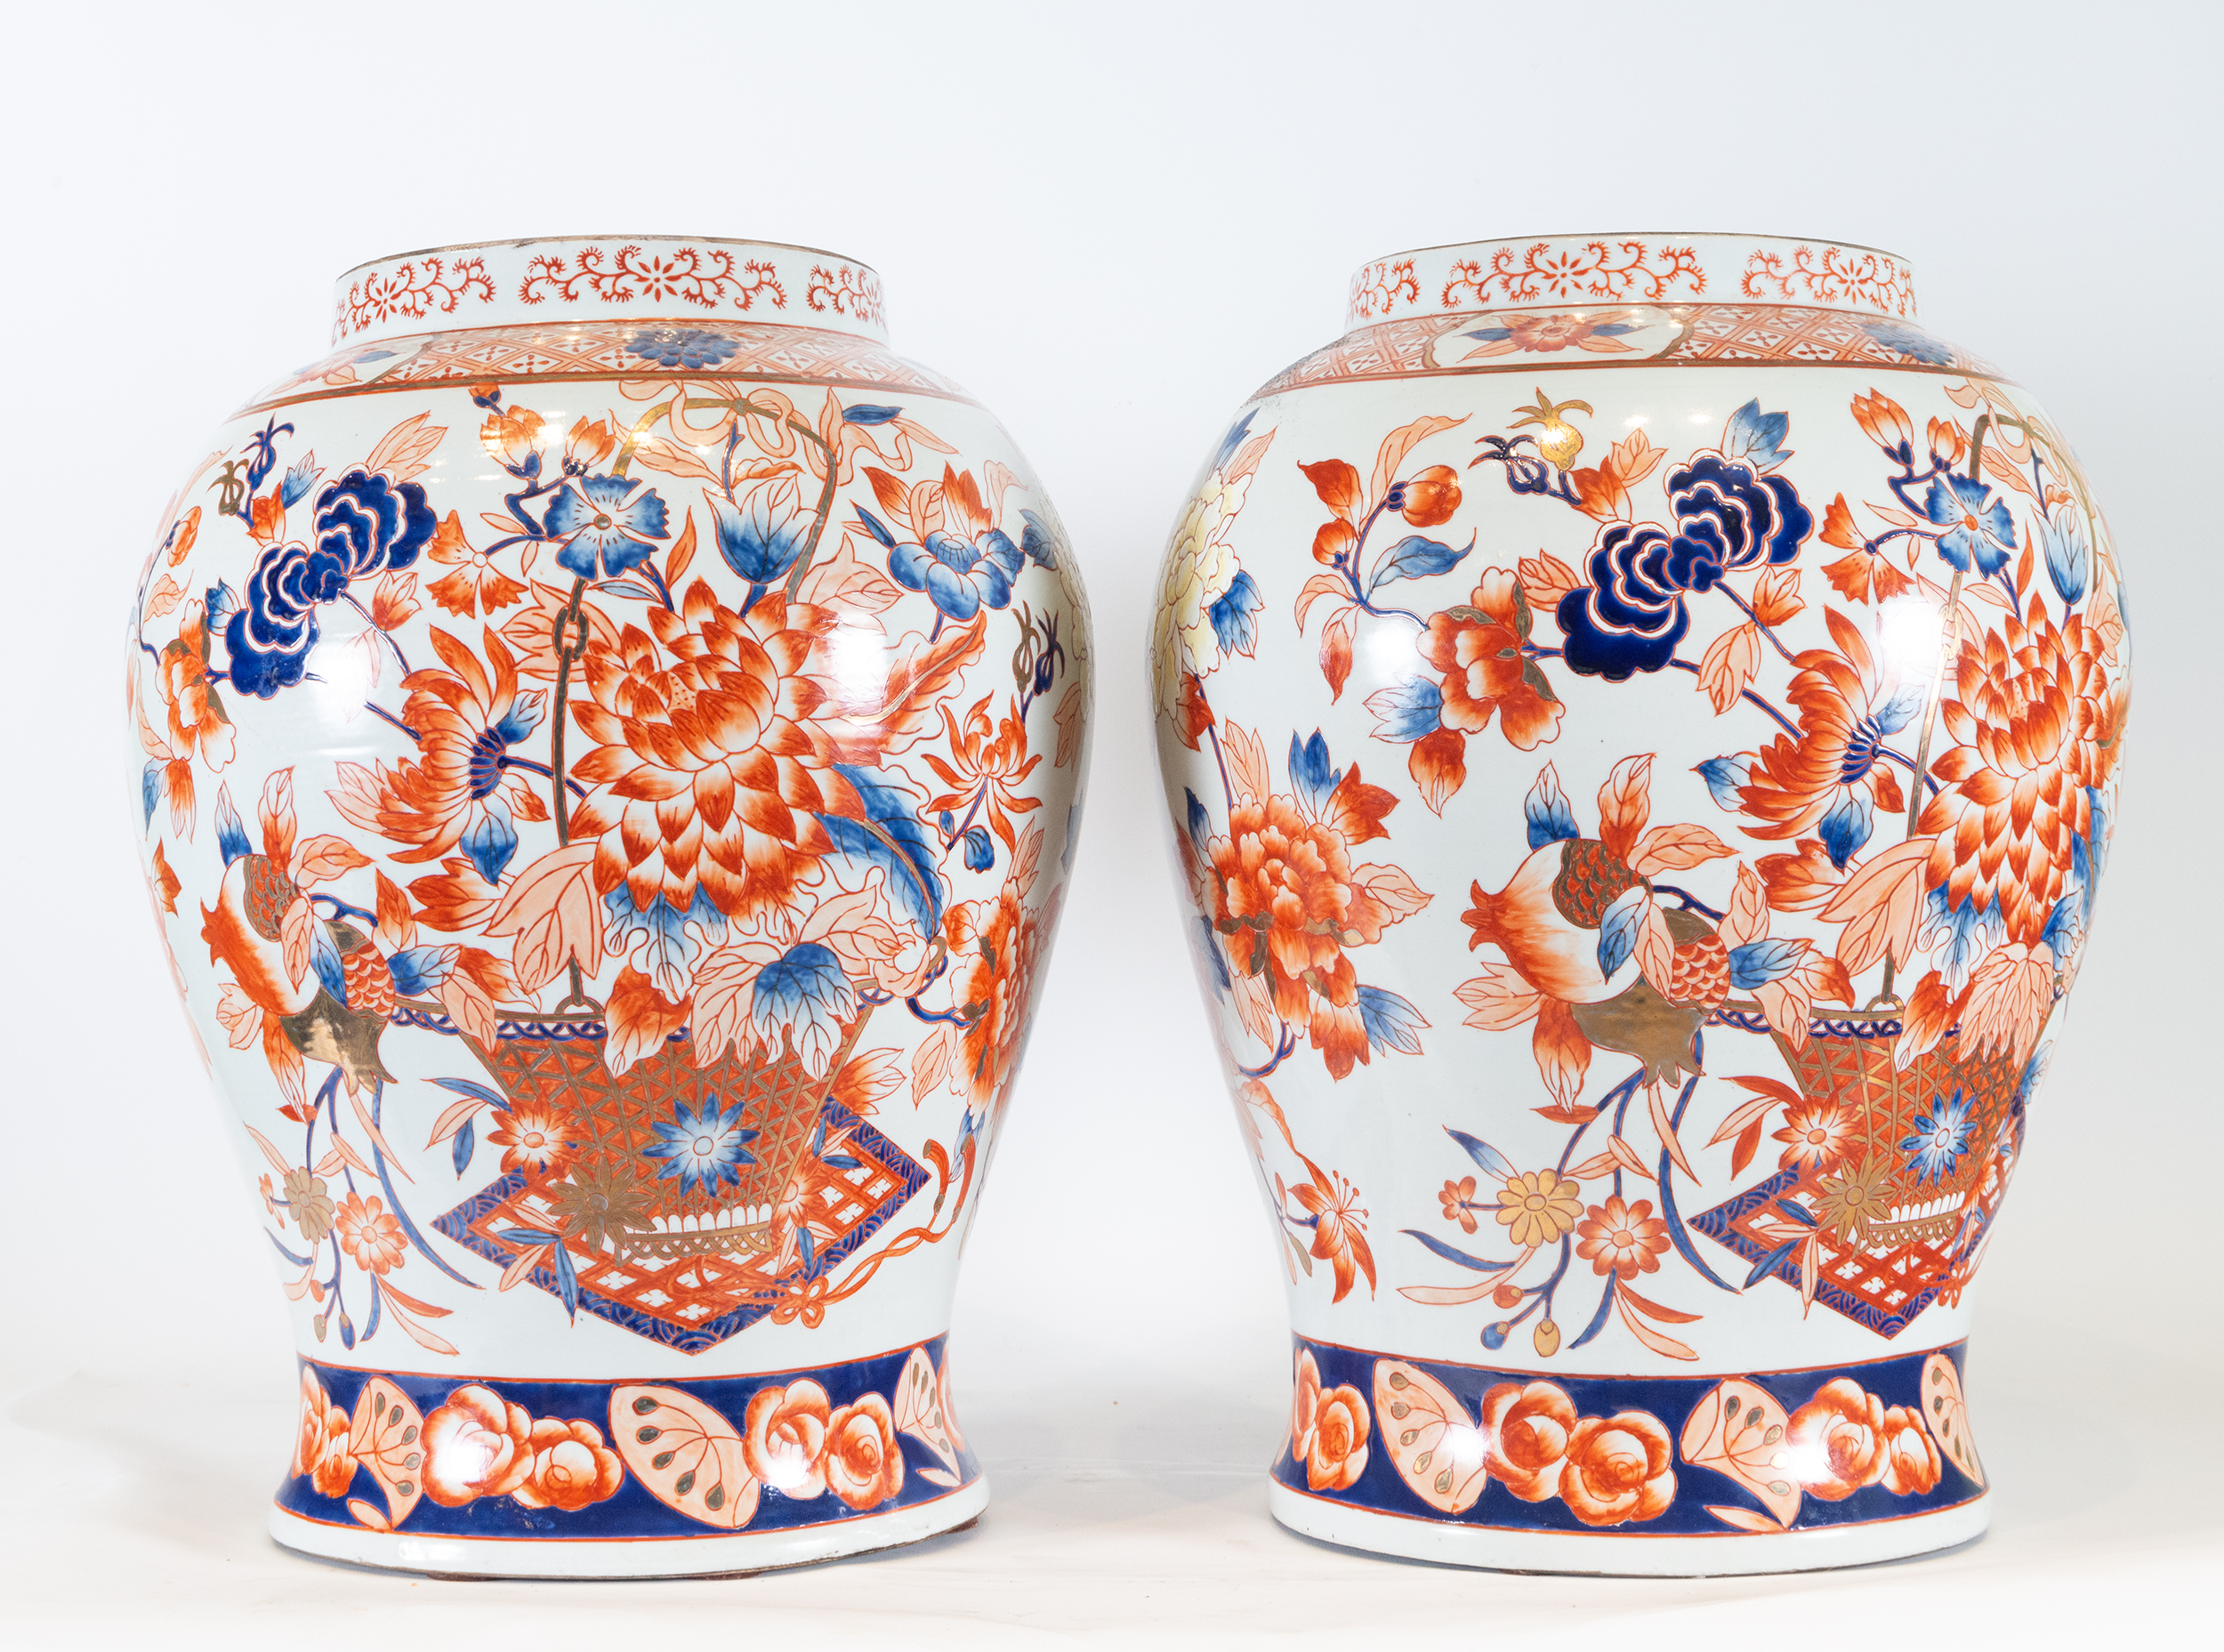 Elegant pair of Imari porcelain bowls, Chinese work from the 19th - 20th century - Image 2 of 5